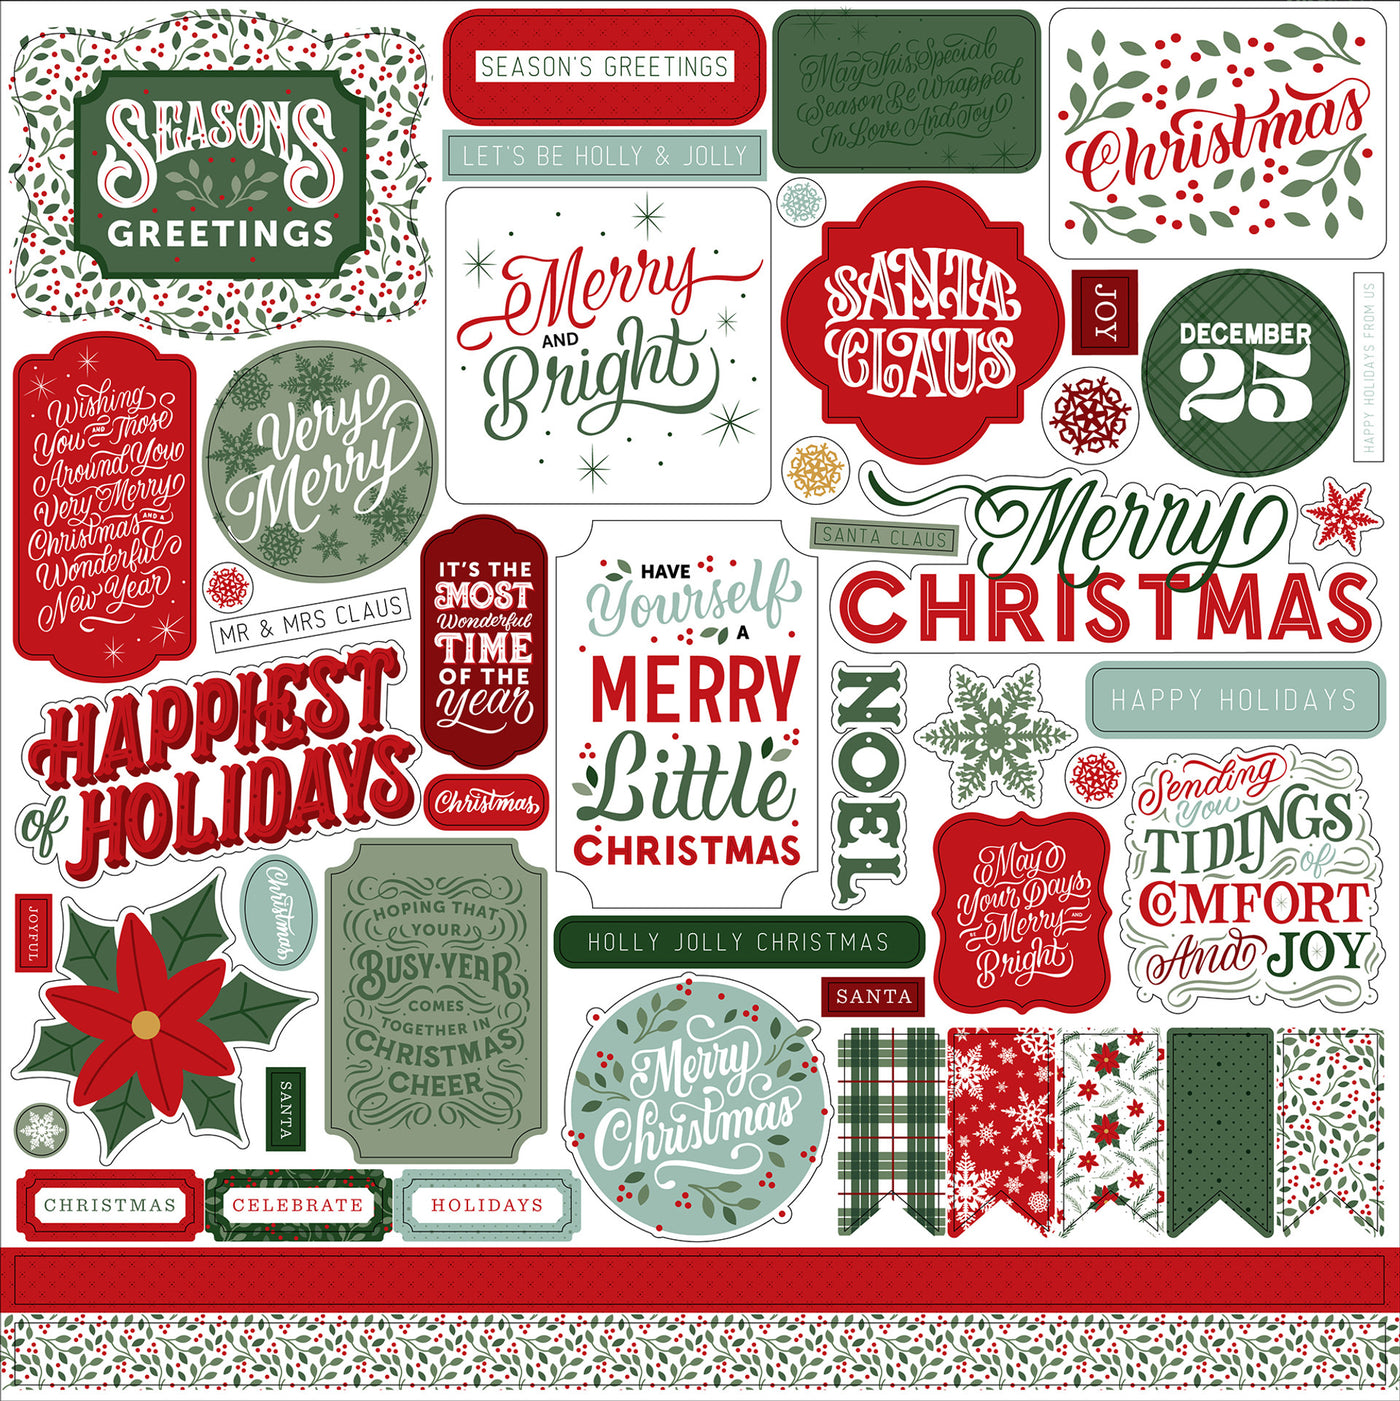 Christmas Salutations No.2 Elements 12" x 12" Cardstock Stickers from the Christmas Salutations No.2 Collection by Echo Park. These stickers include poinsettias, banners, candles, phrases, borders, and more!  